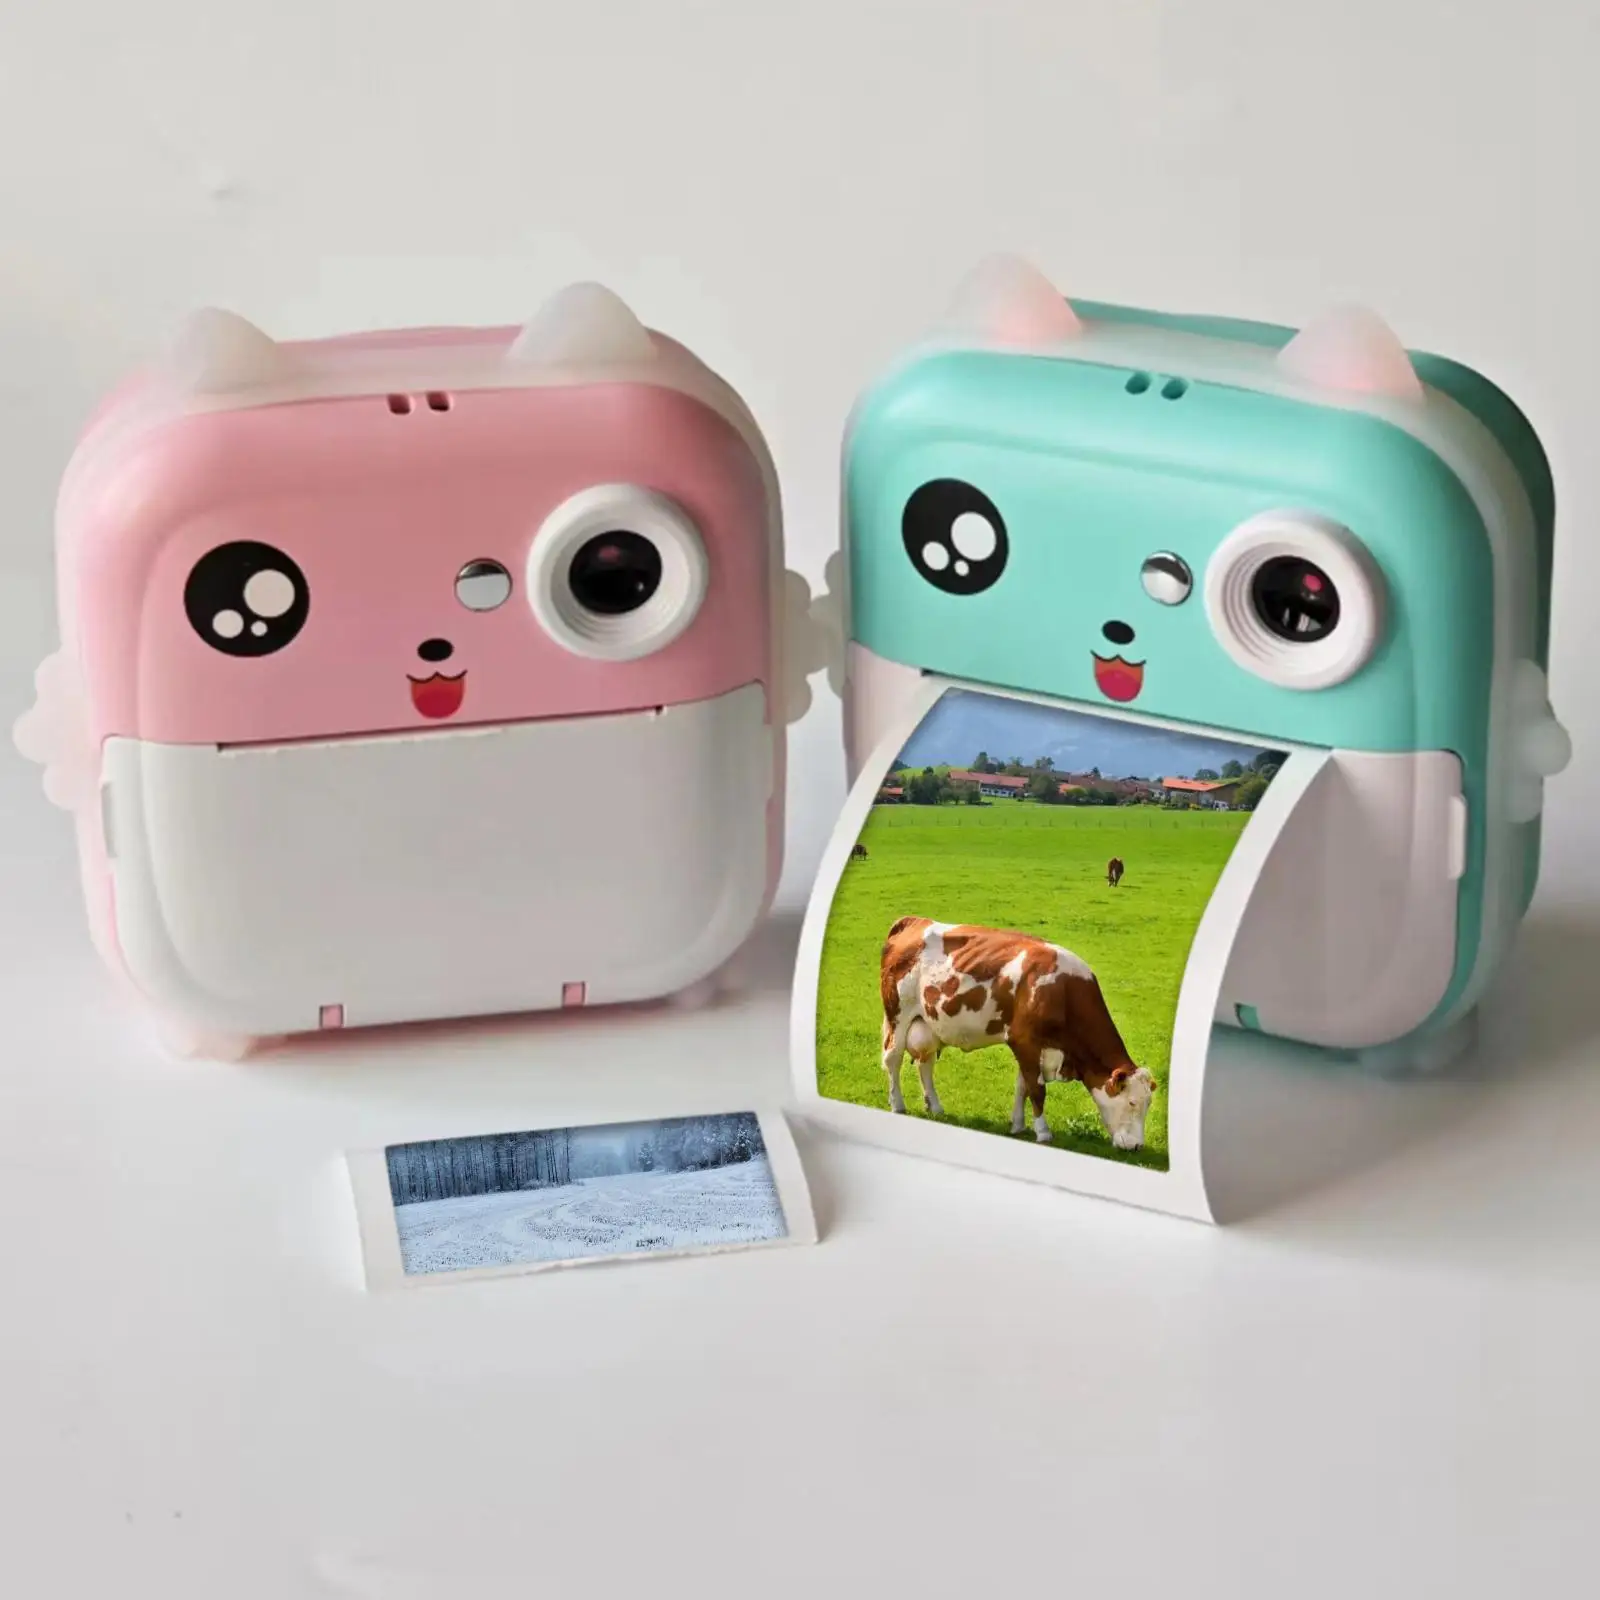 Camera Instant Print Photo and Video Recording 2.4 inch Screen Toys Kids Digital Camera for 5-8 Year Old Girls Birthday Gifts